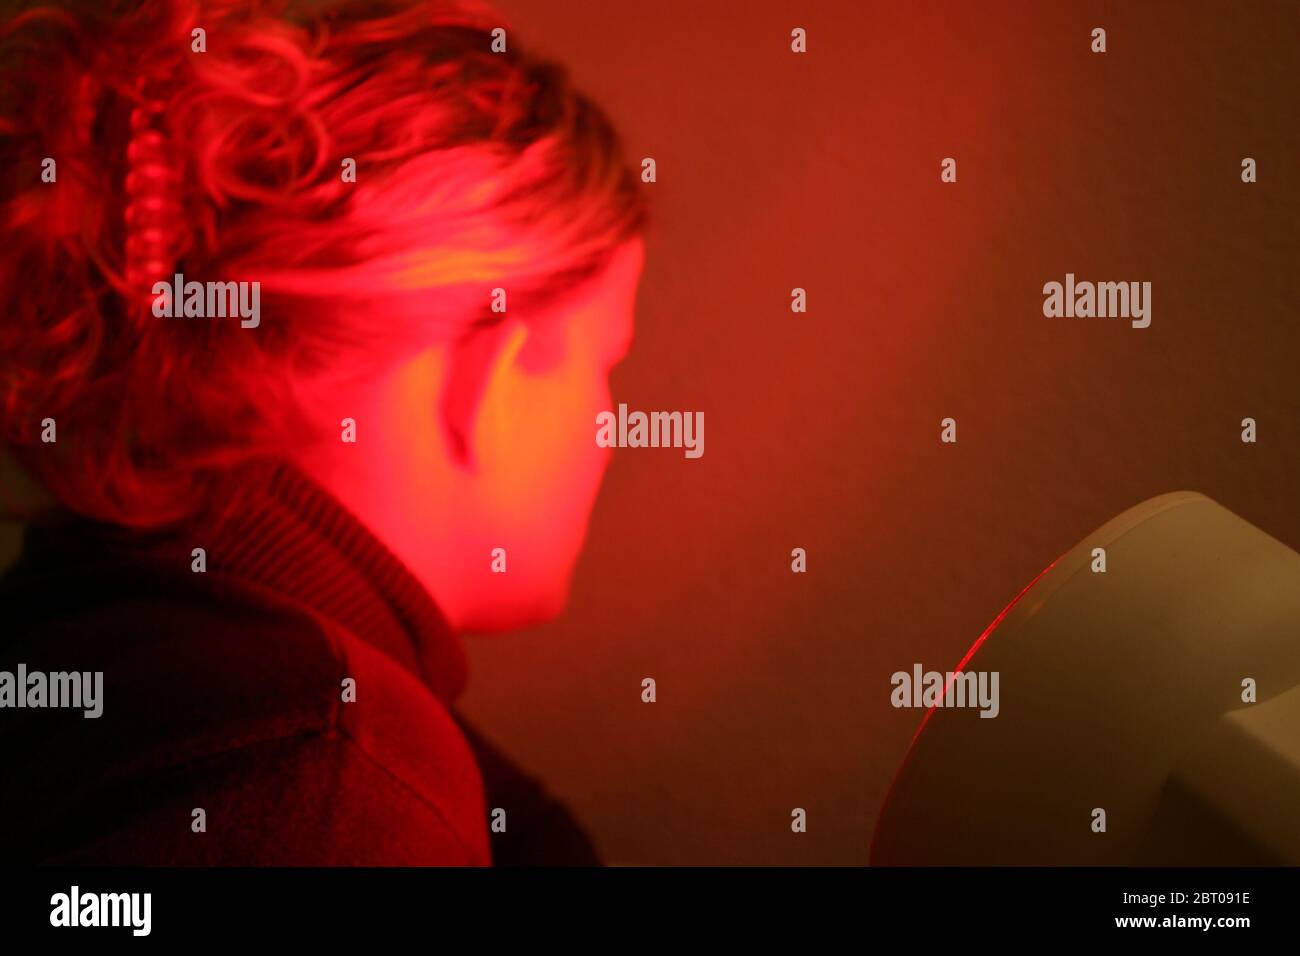 young woman is illuminated by red light Stock Photo